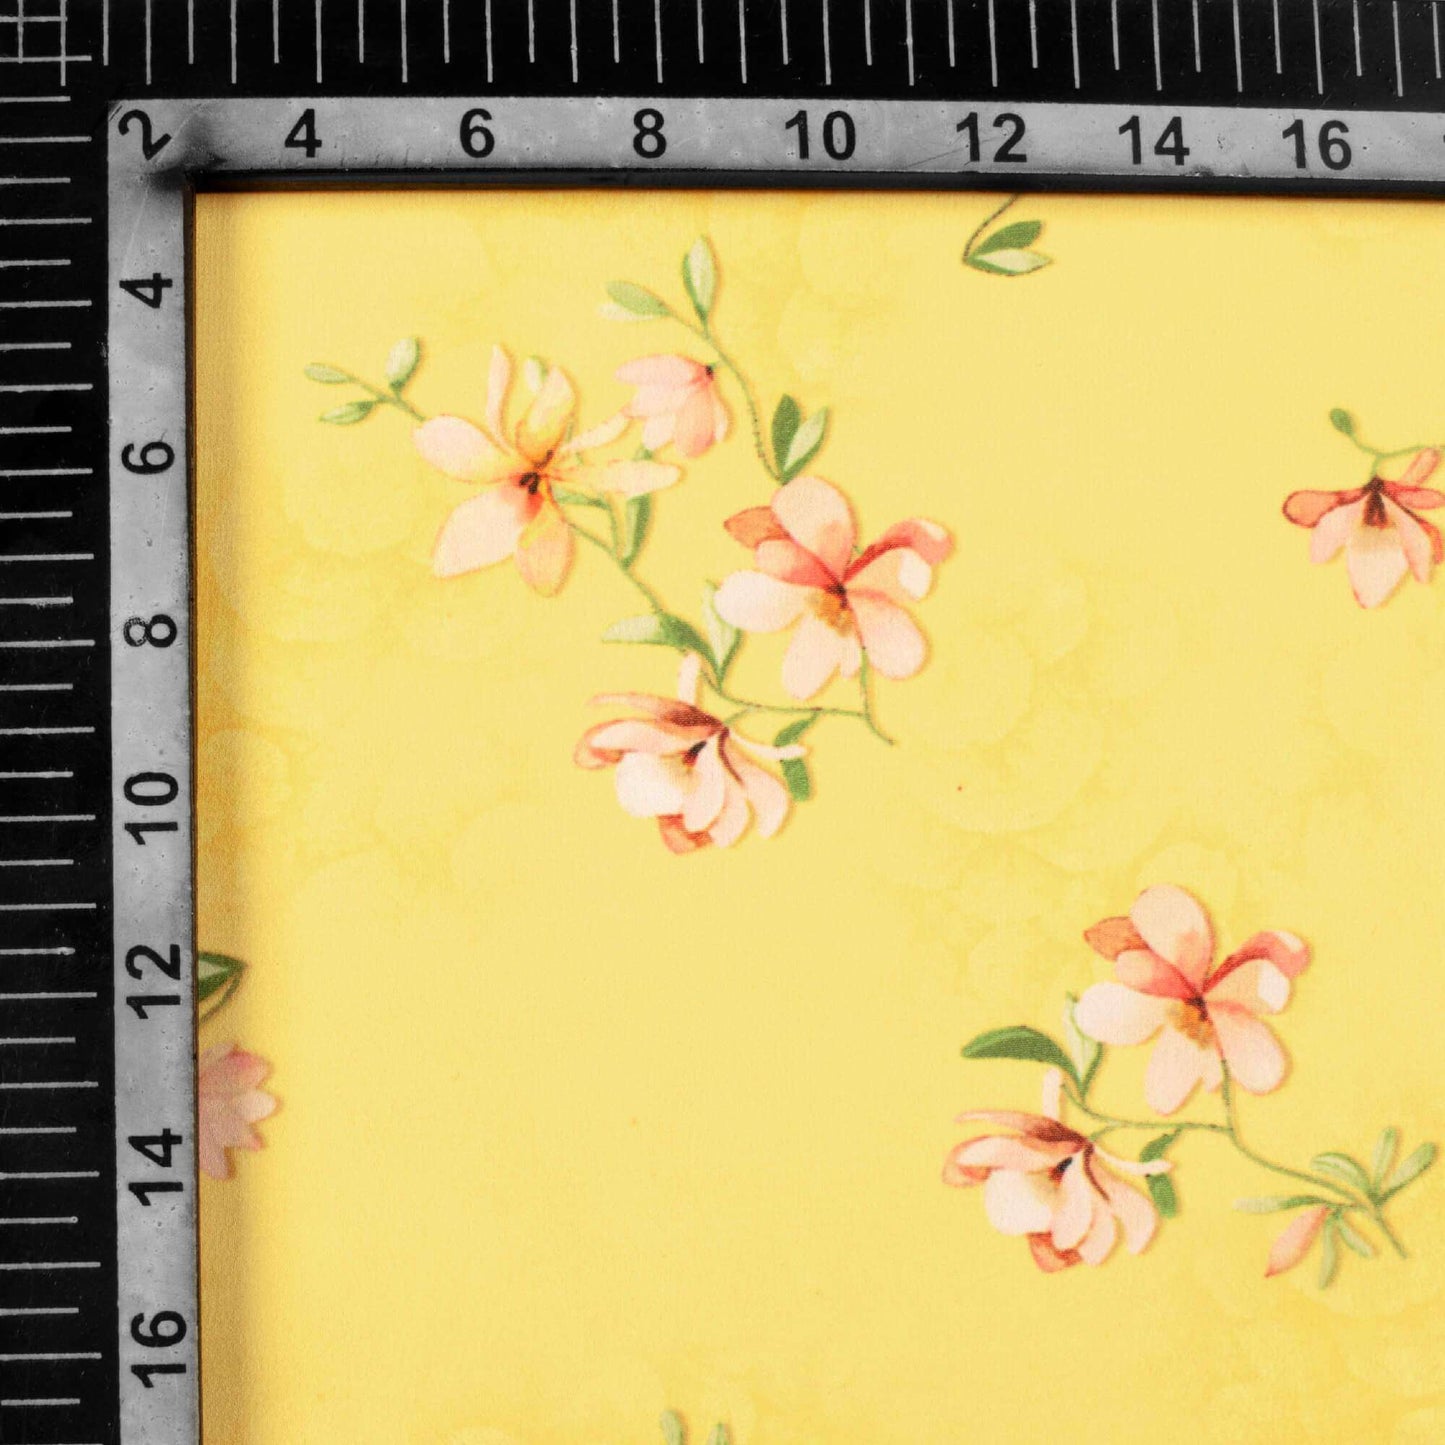 Mellow Yellow And White Floral Pattern Digital Print Georgette Fabric